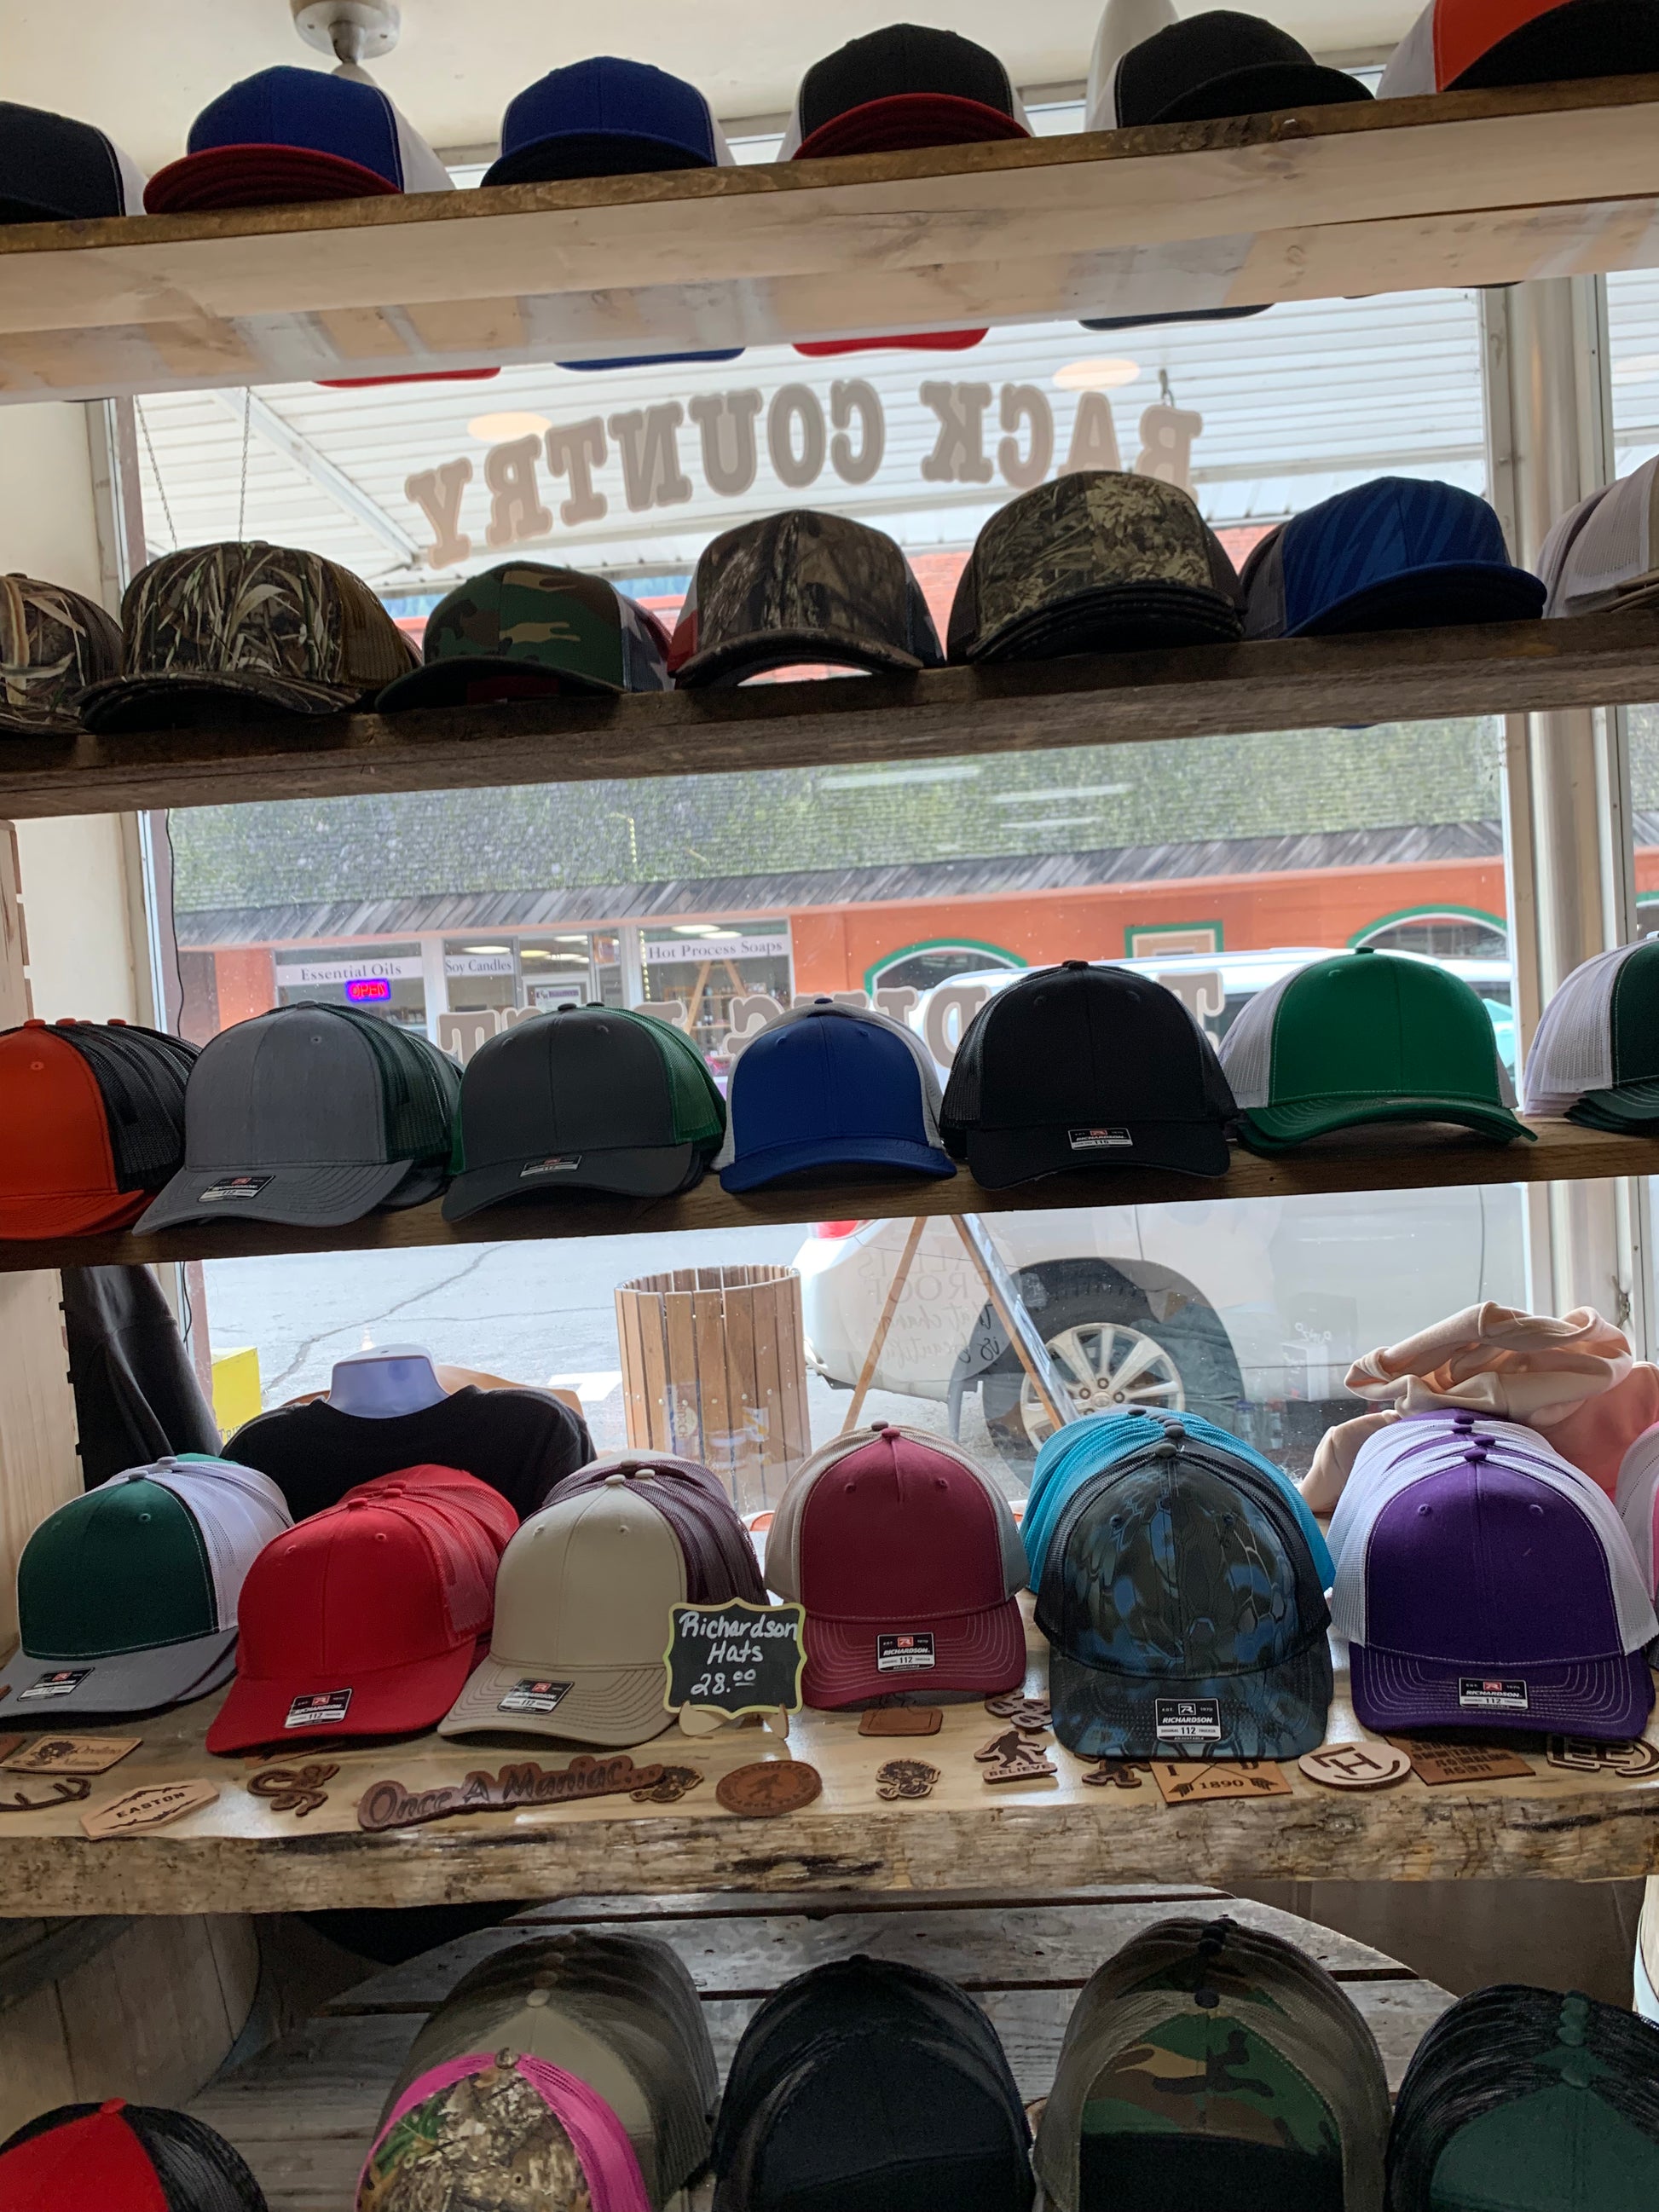 Richardson Hat – Back Country Trading Post